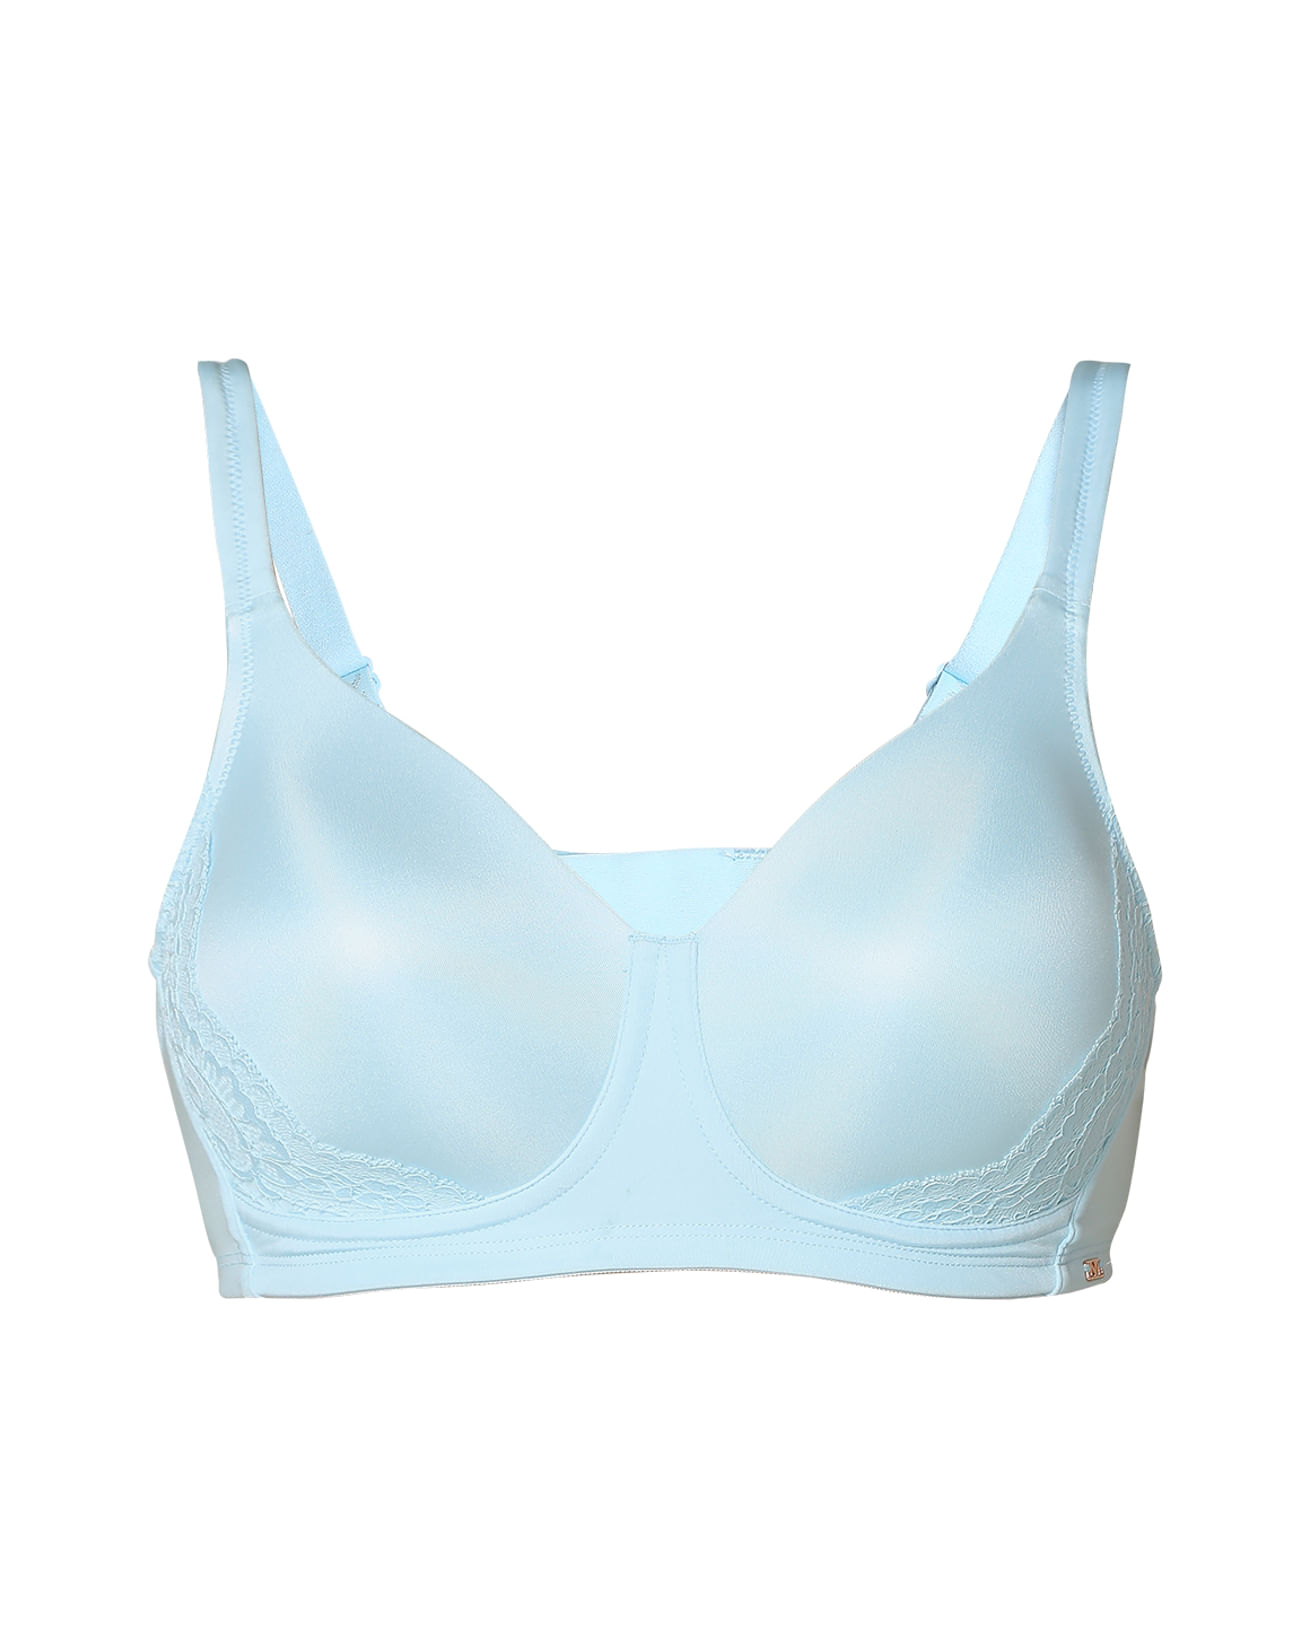 Buy BODYAAN 504 Heavy Padded Full Coverage B Cup Cotton Bra Blue